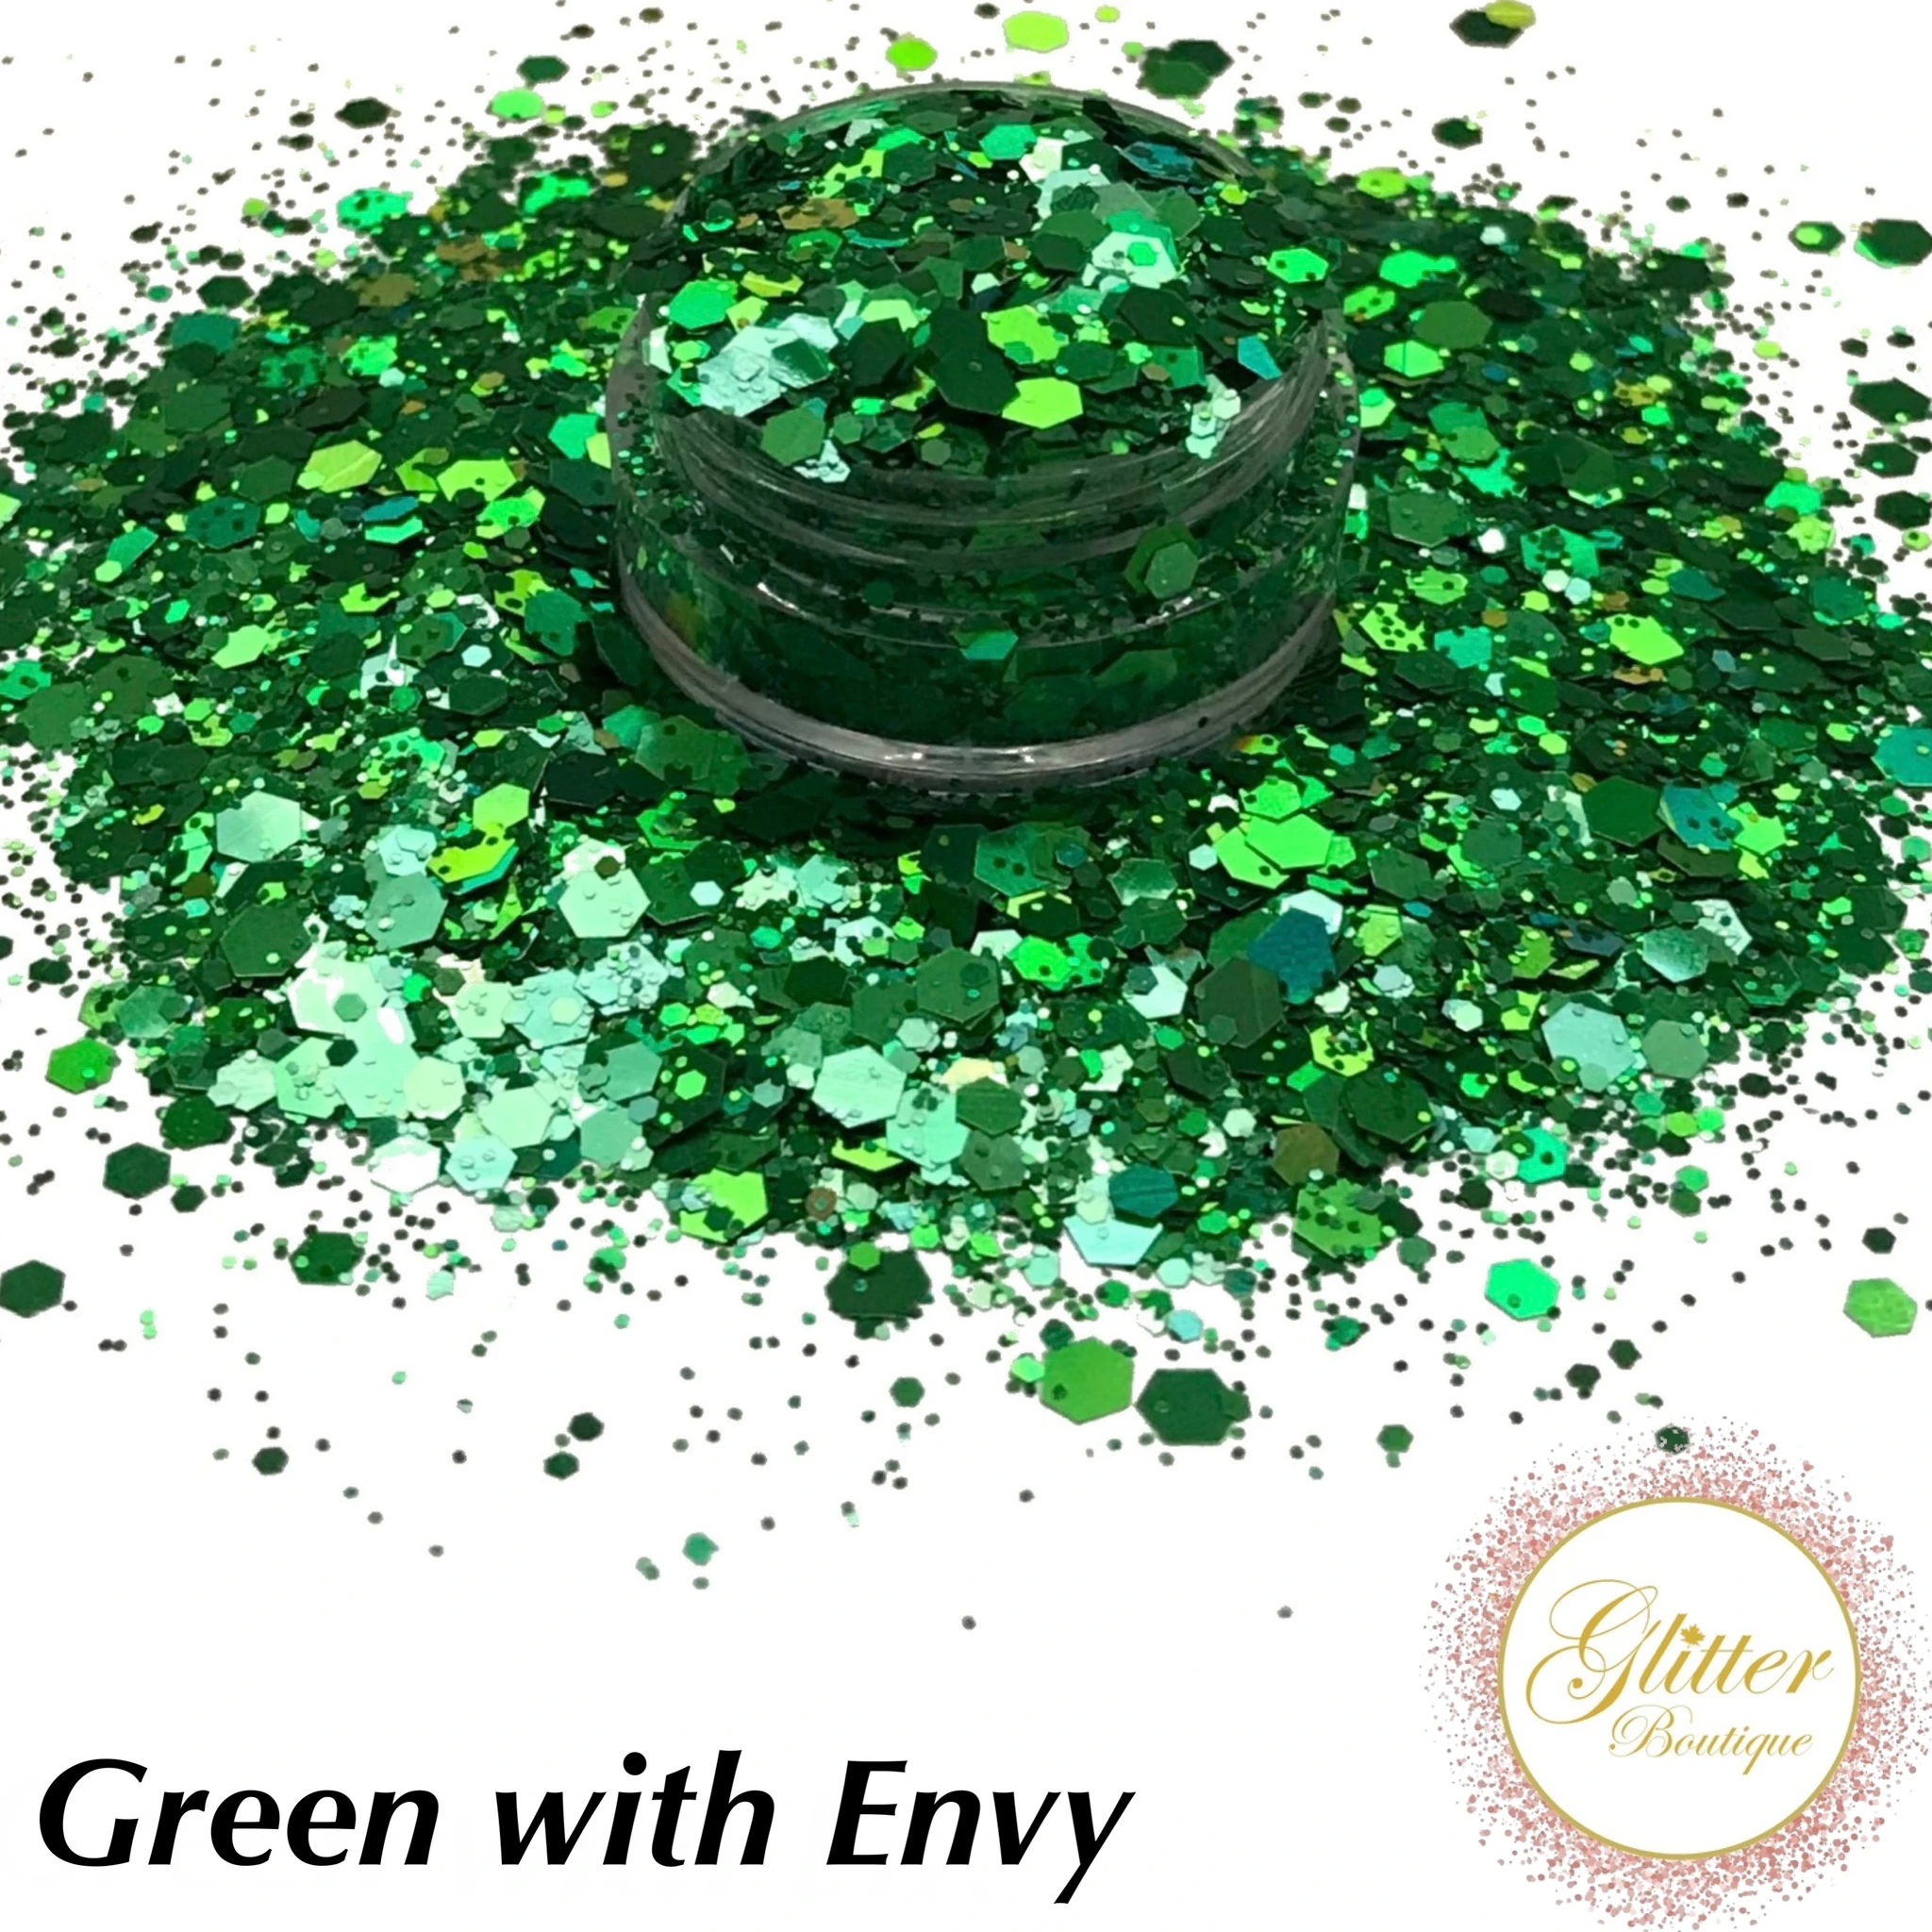 Glitter Boutique - Green with Envy - Creata Beauty - Professional Beauty Products